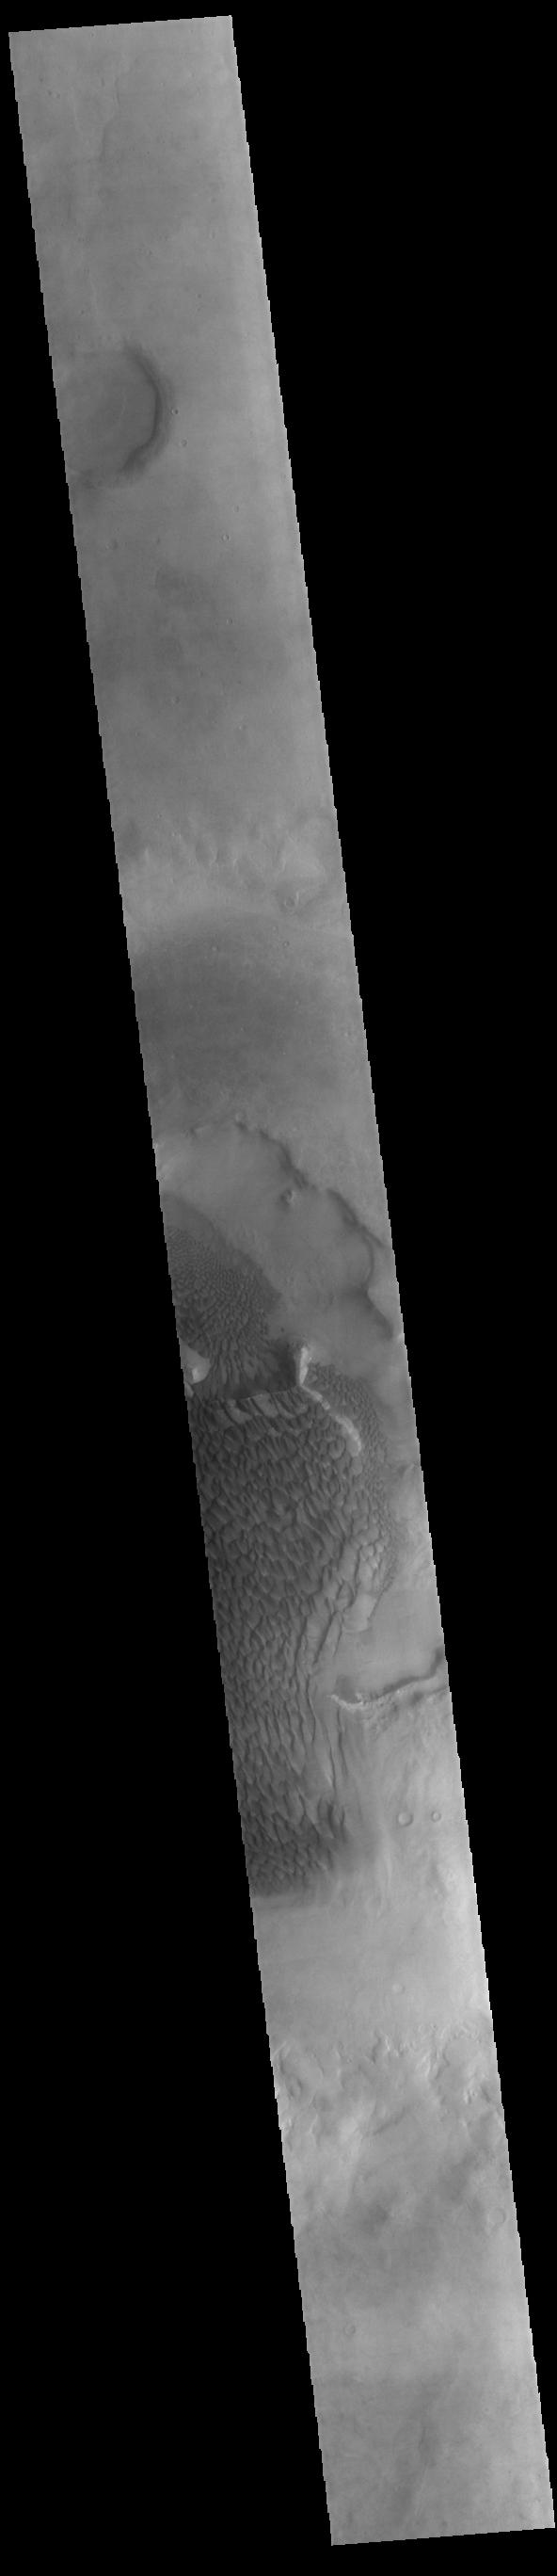 PIA24739: Rabe Crater Dunes